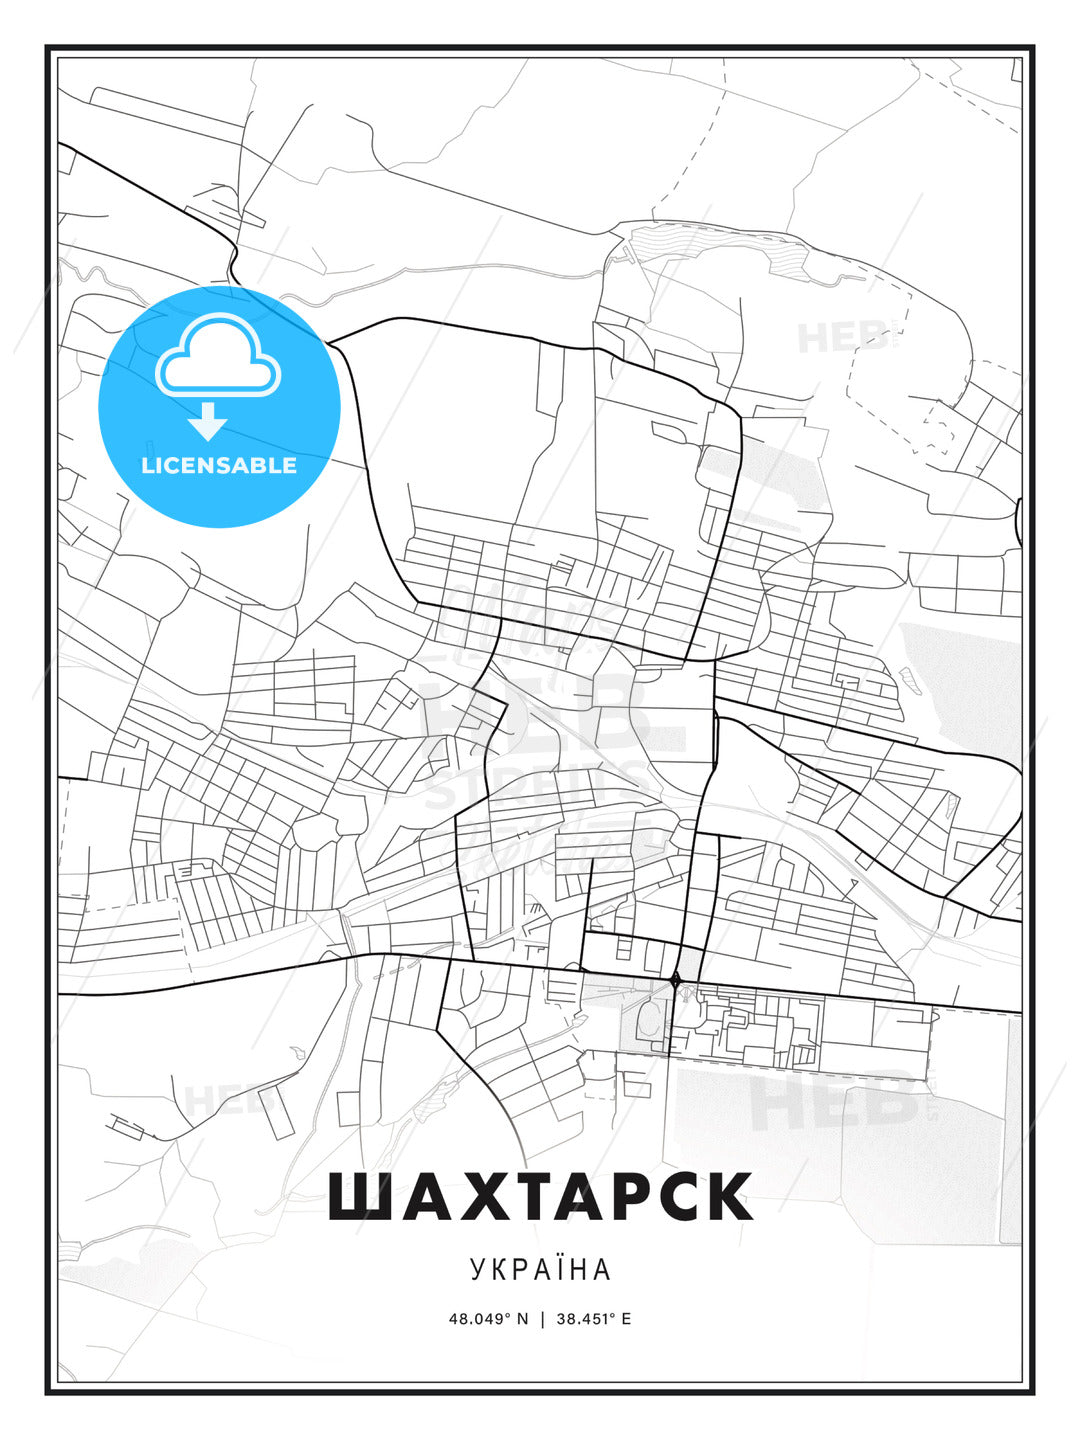 ШАХТАРСК / Shakhtarsk, Ukraine, Modern Print Template in Various Formats - HEBSTREITS Sketches